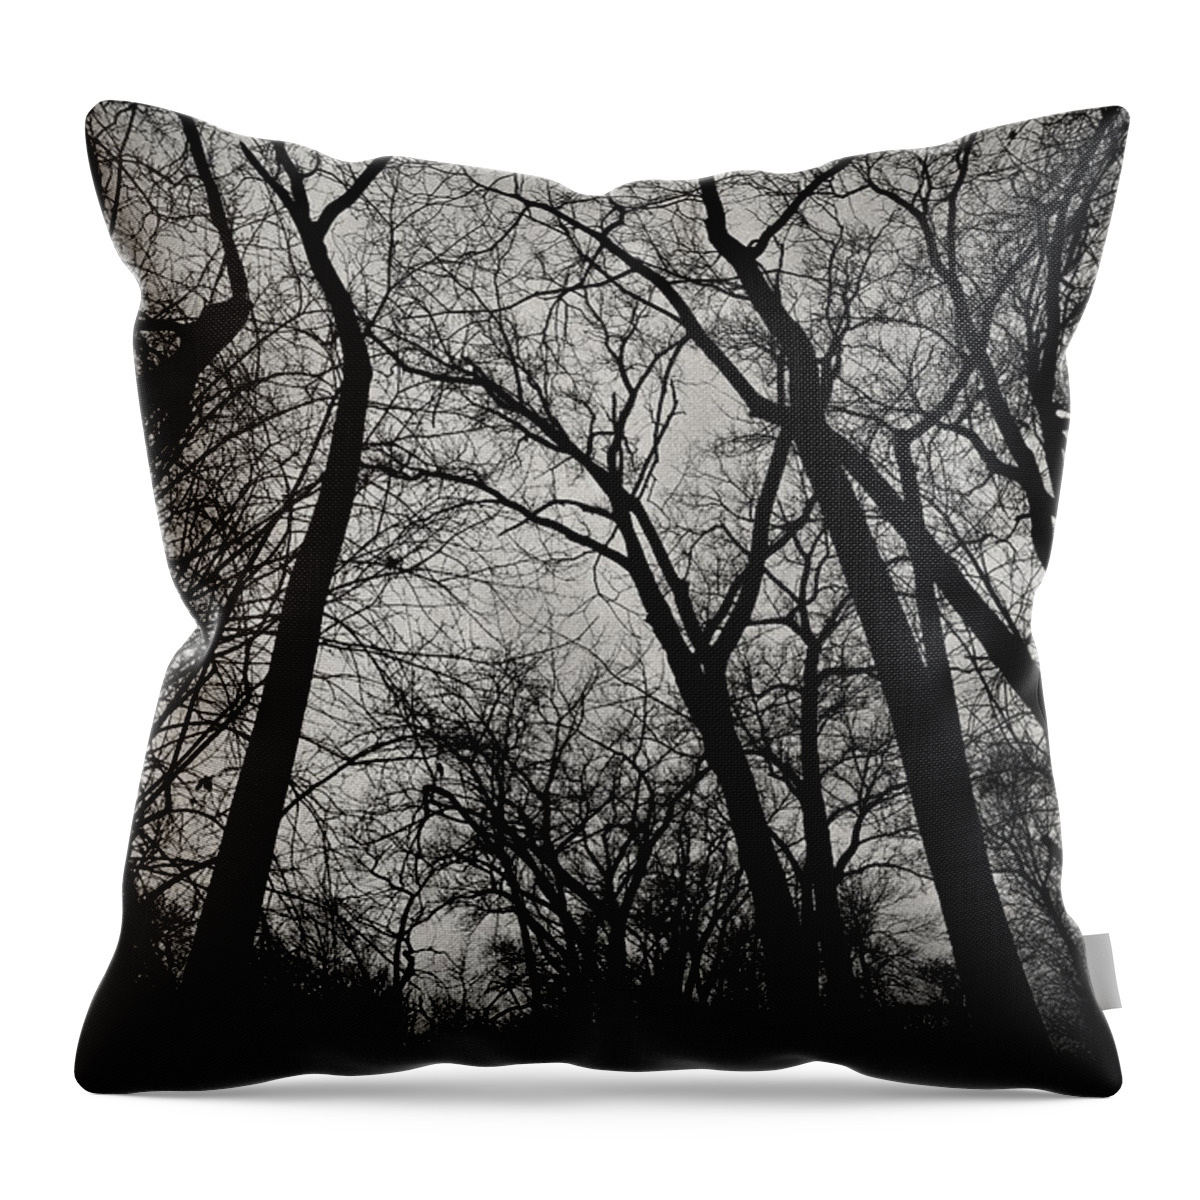 Monochrome Throw Pillow featuring the photograph The Haunt of Winter by CJ Schmit